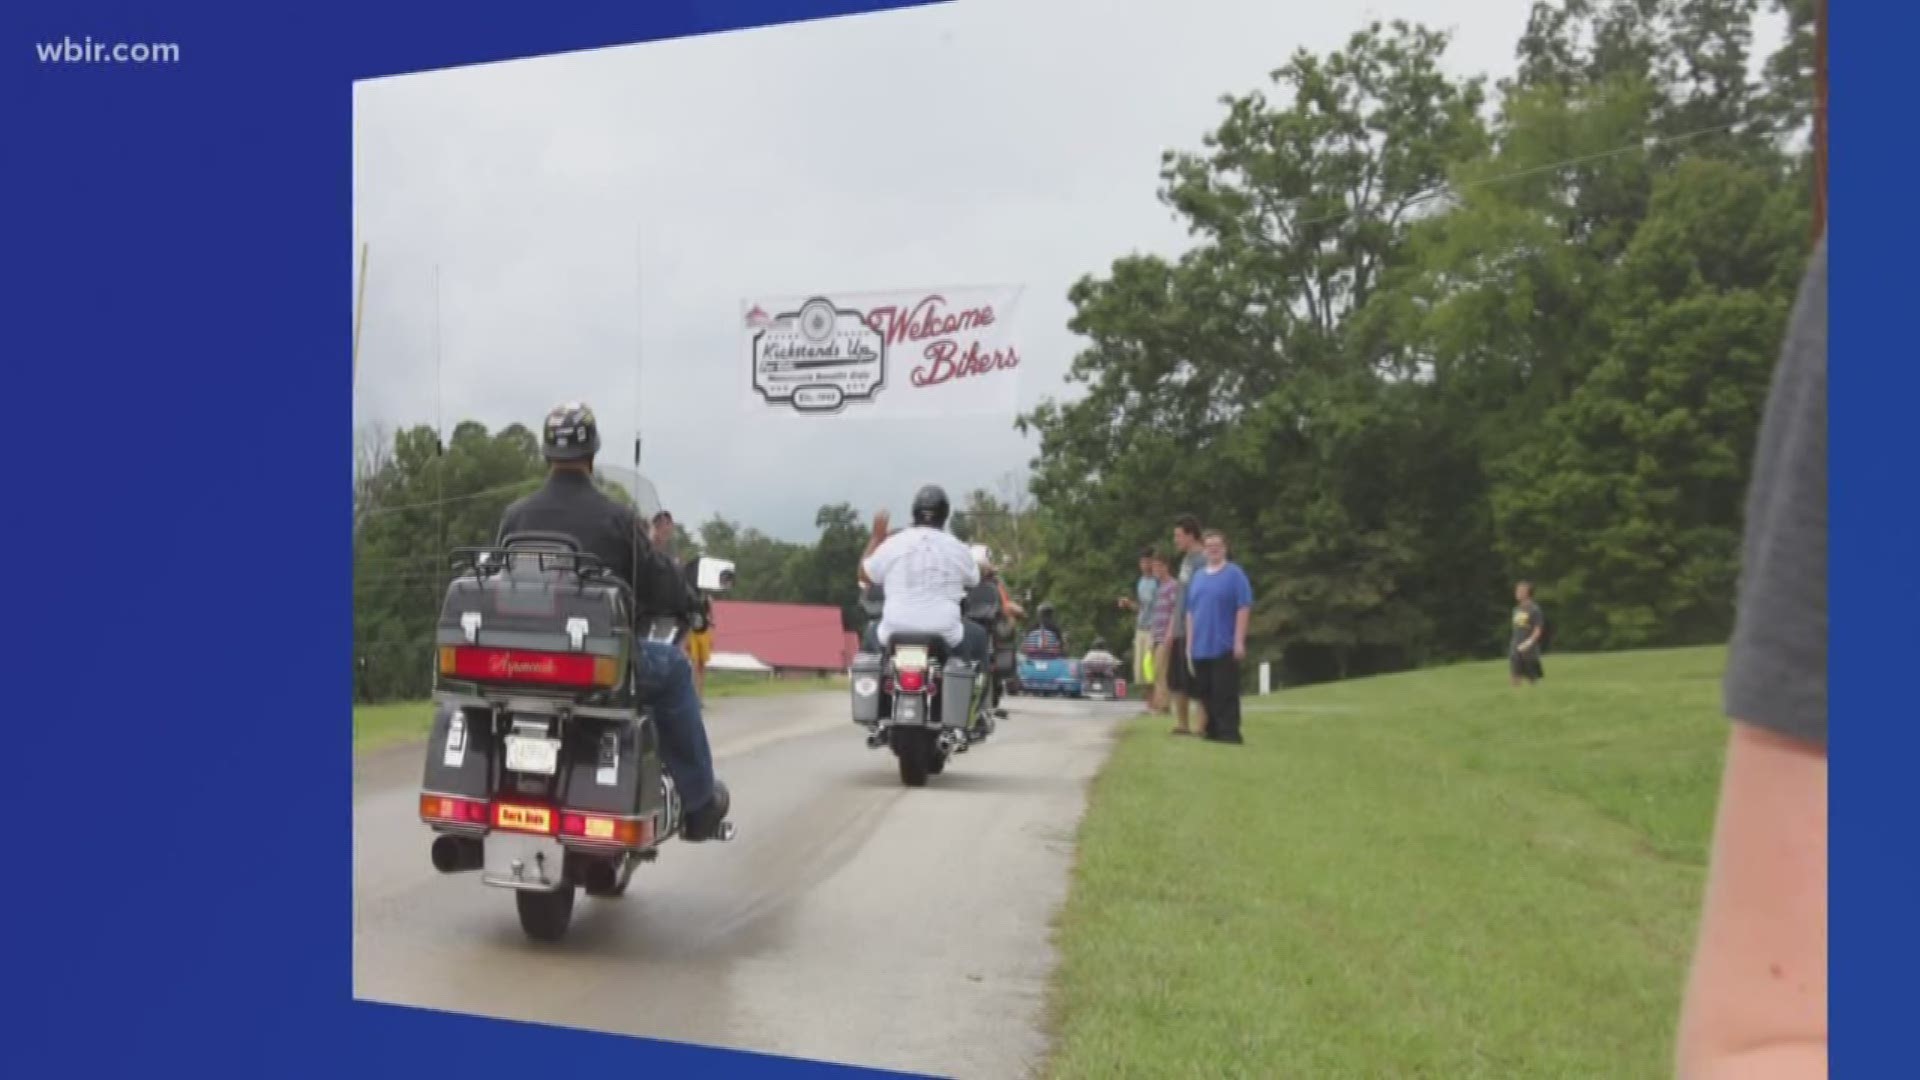 "Kickstands Up for Kids" Ride to beneift Kingswood Home for Children  is Saturday, July 27. The ride starts at Smokies Stadium-Kodak. Registration at 9am/Kickstands up at 11am
$10 per rider. Follow them on Facebook to learnmore. July 22, 2019-4pm.